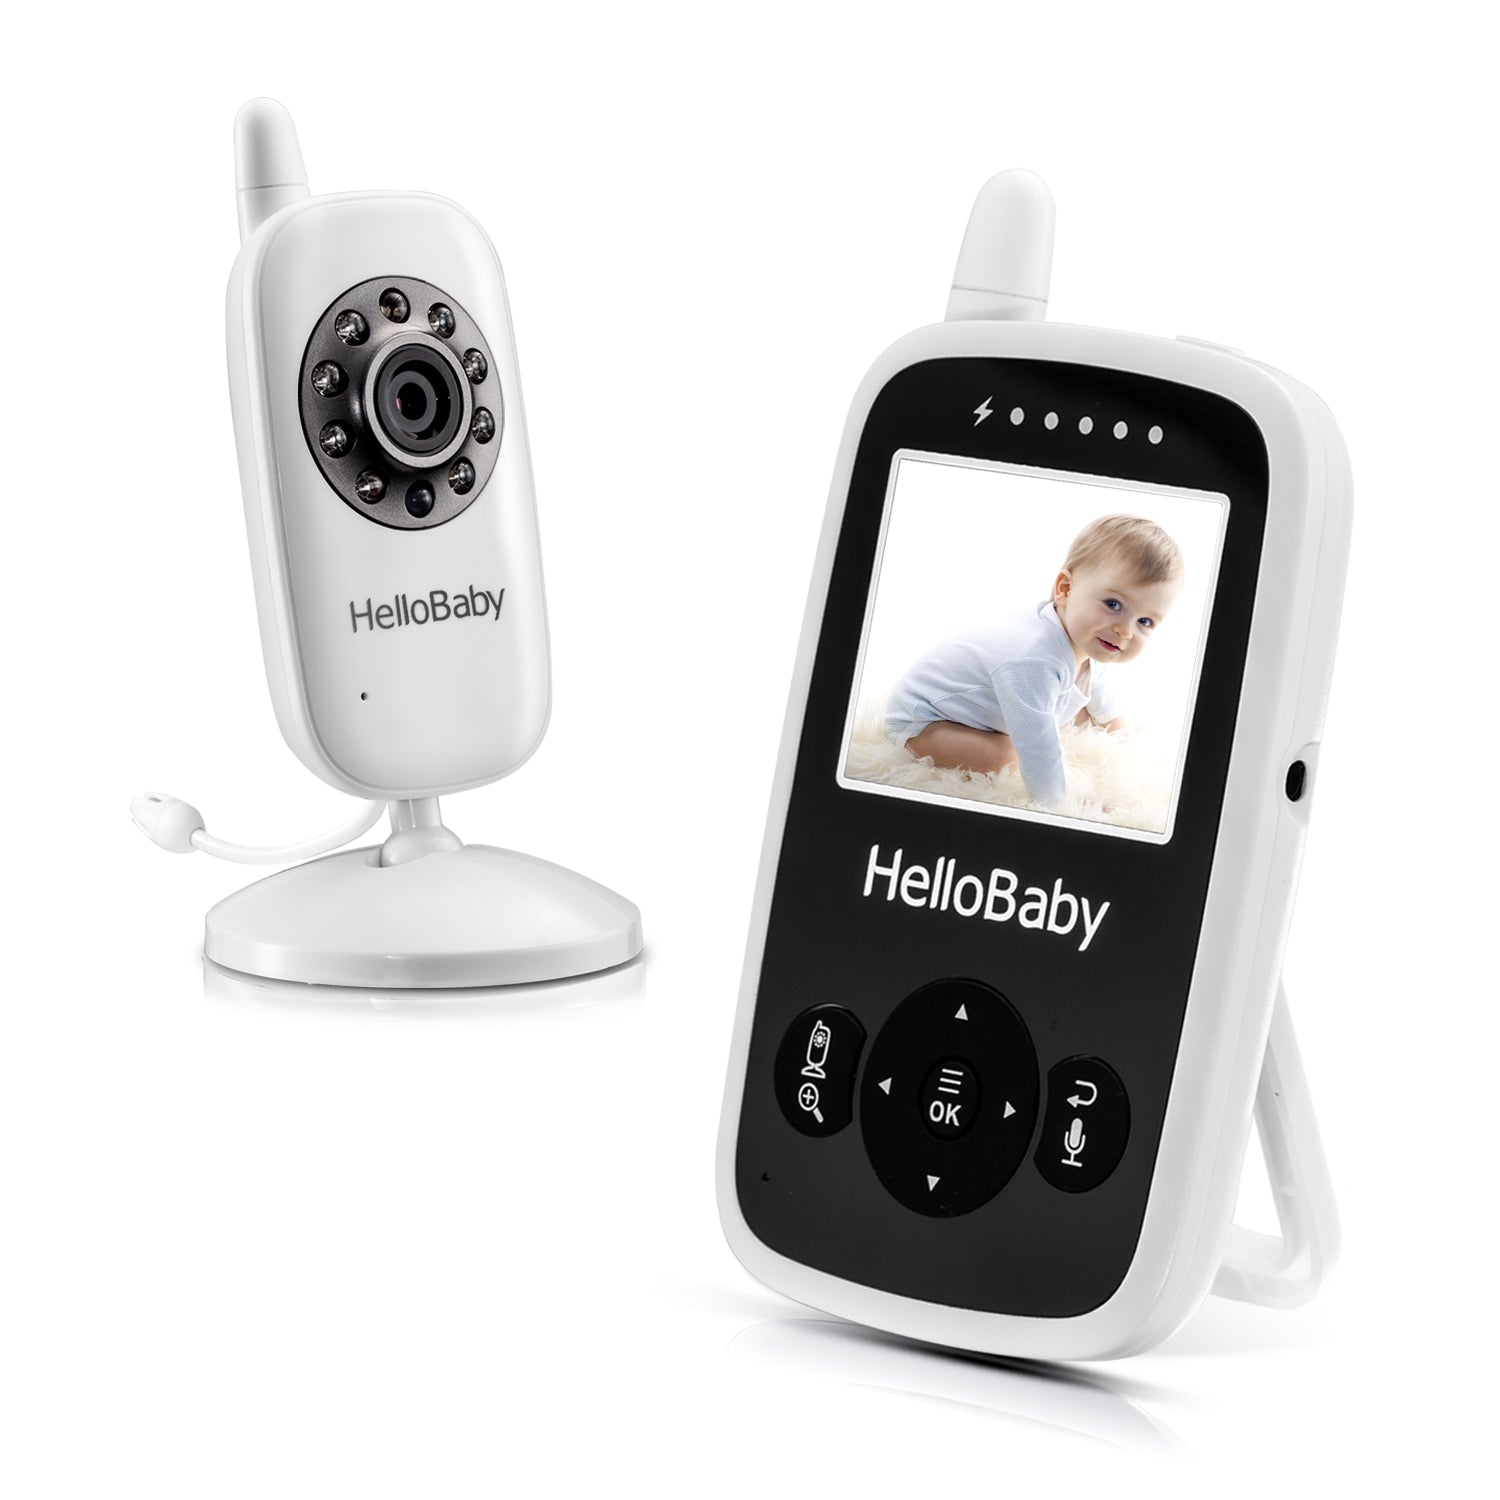 Hellobaby Wireless Video Baby Monitor with Camera - Baby Monitors -  Singapore, Facebook Marketplace